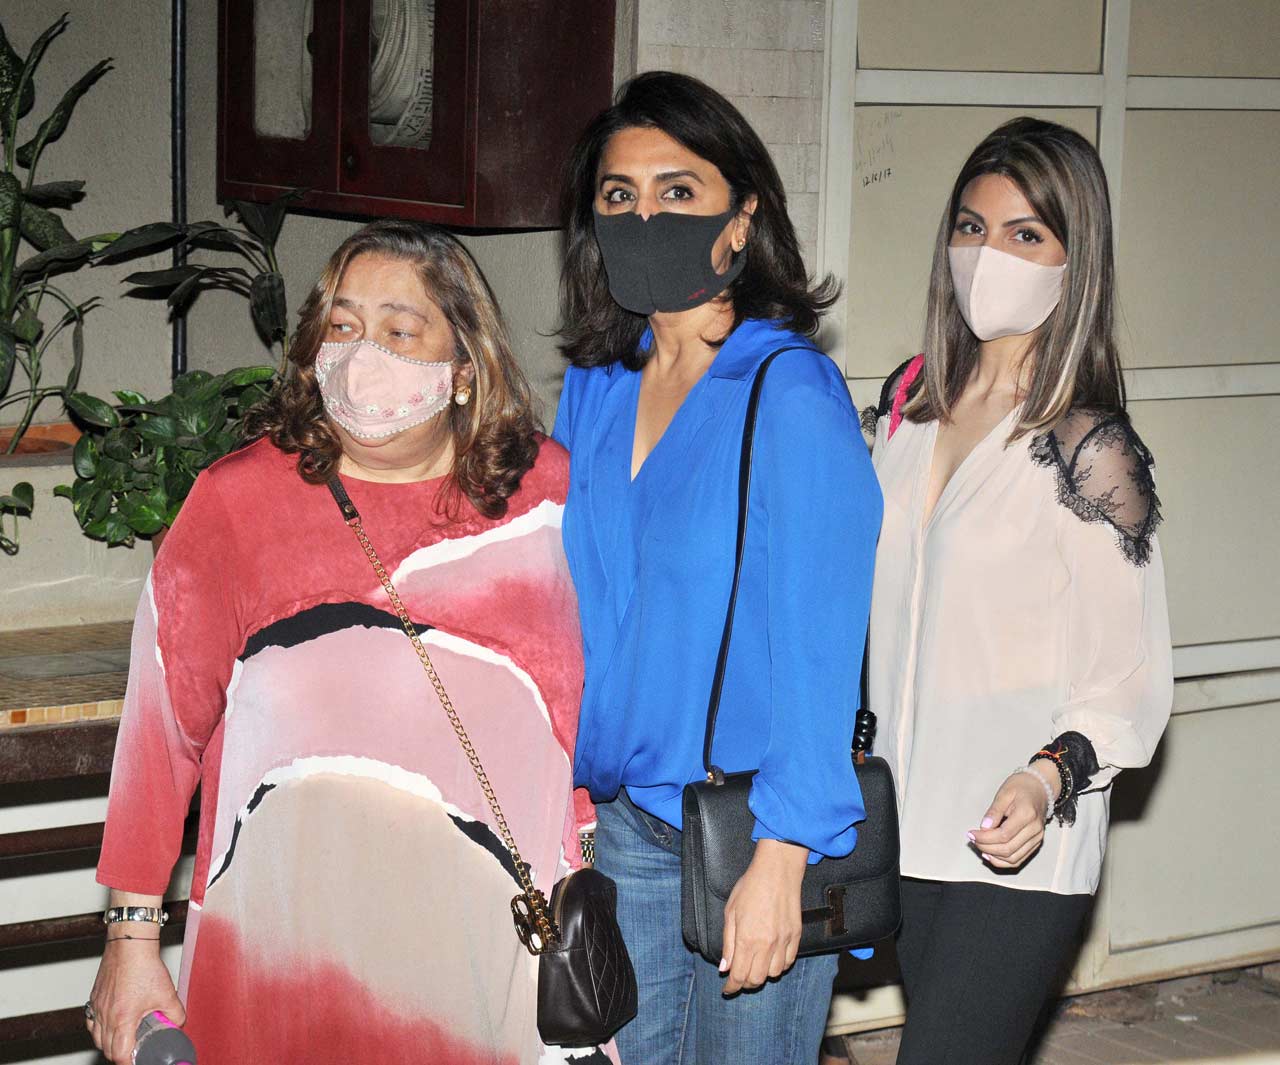 Reema Jain, Neetu Kapoor walked in together with Riddhima Kapoor Saini. The businesswoman is currently living in Mumbai with her mother.